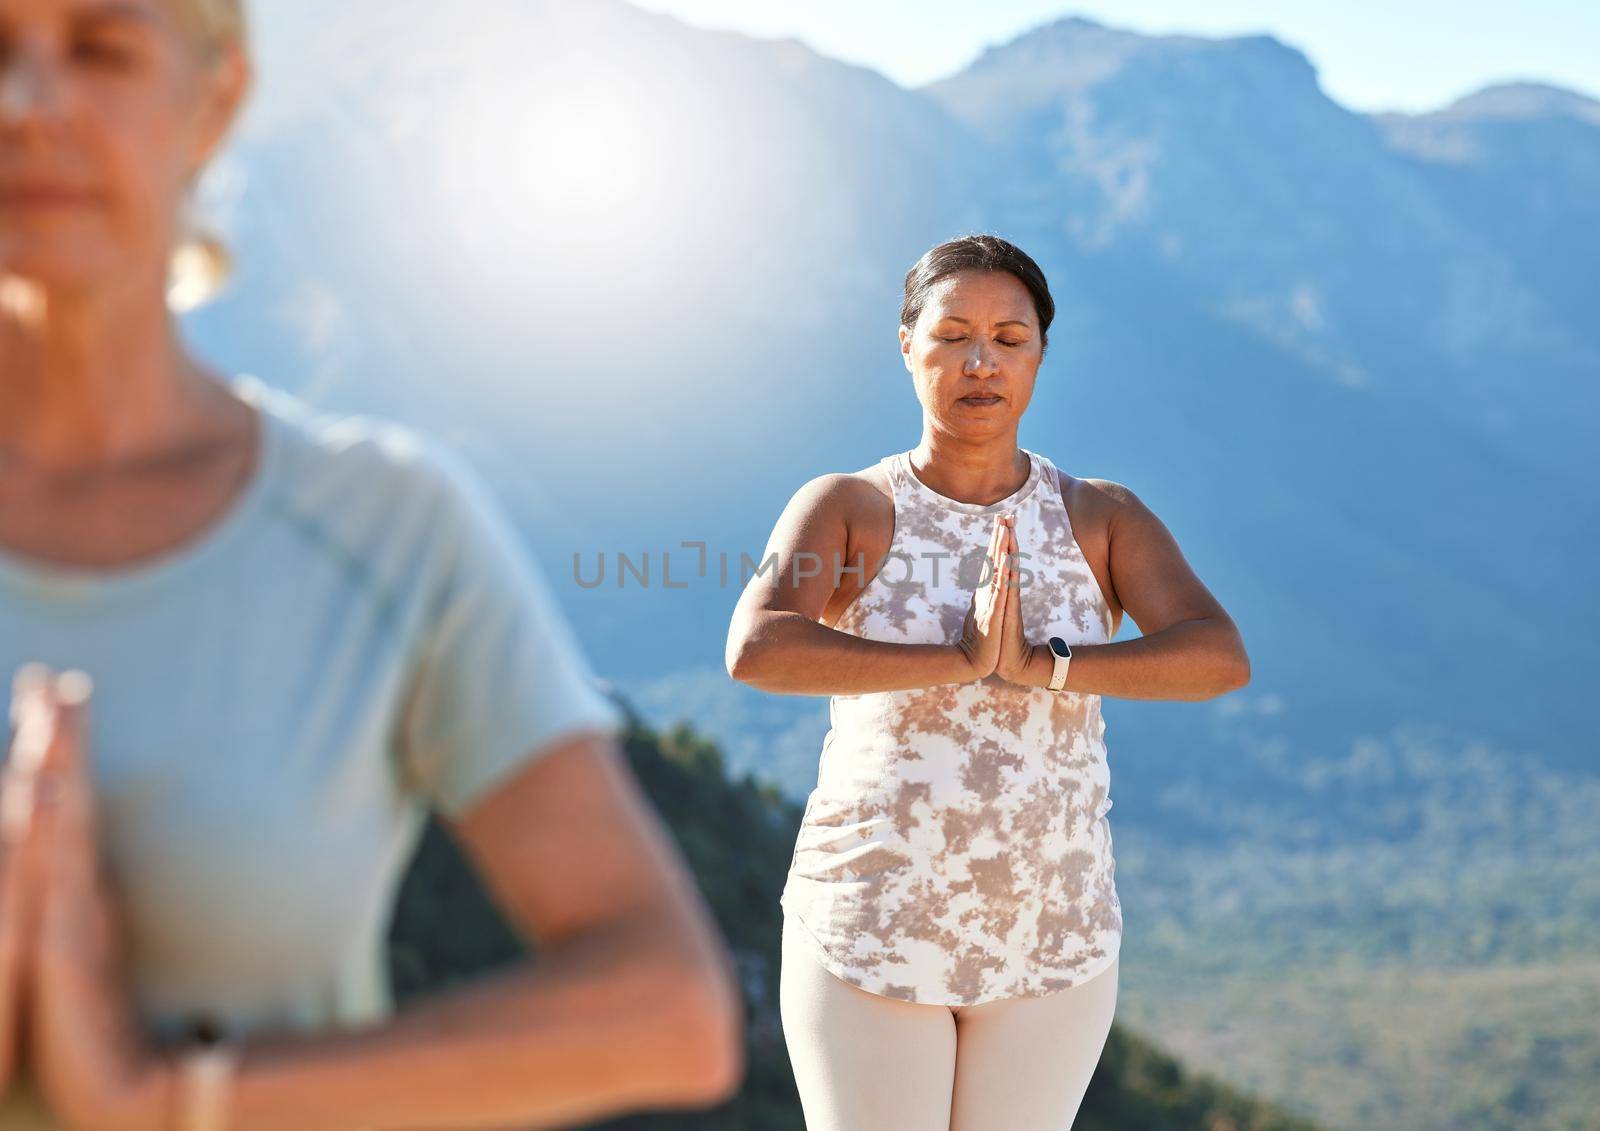 Mature woman meditating with joined hands and closed eyes breathing deeply. Mature people doing yoga together in nature on a sunny day.